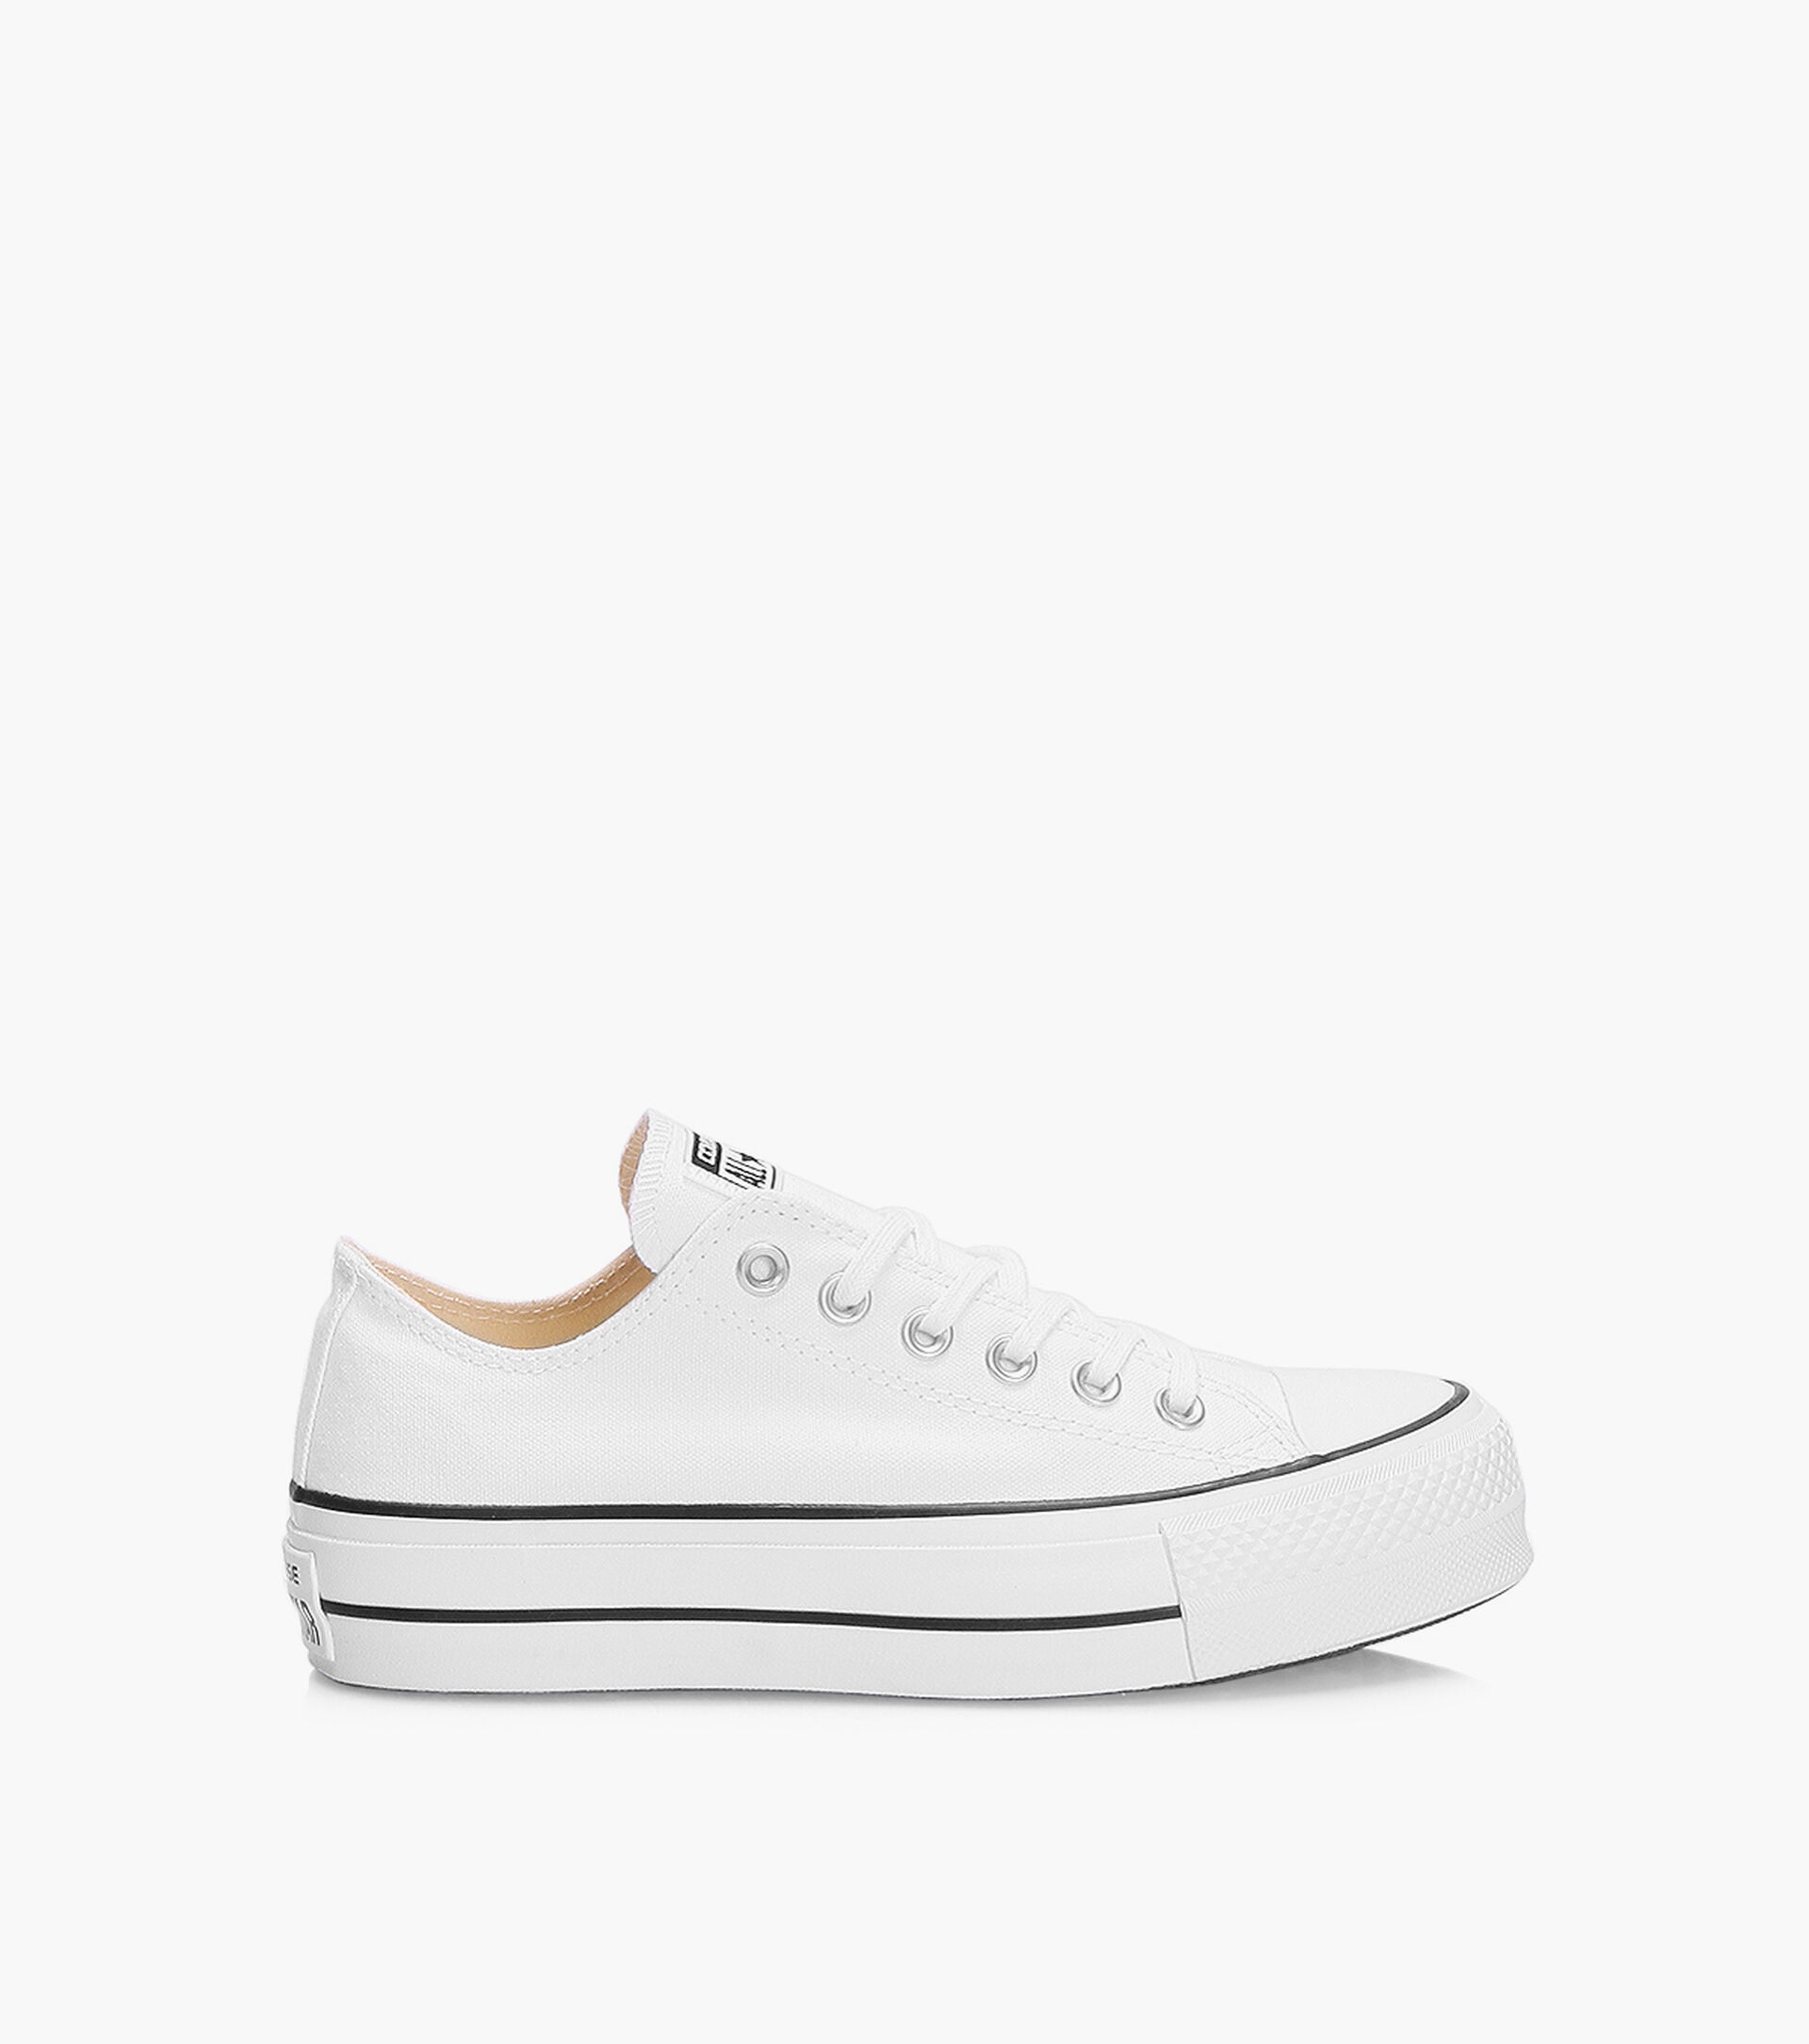 CONVERSE CT AS LIFT CANVAS - Fabric | Browns Shoes